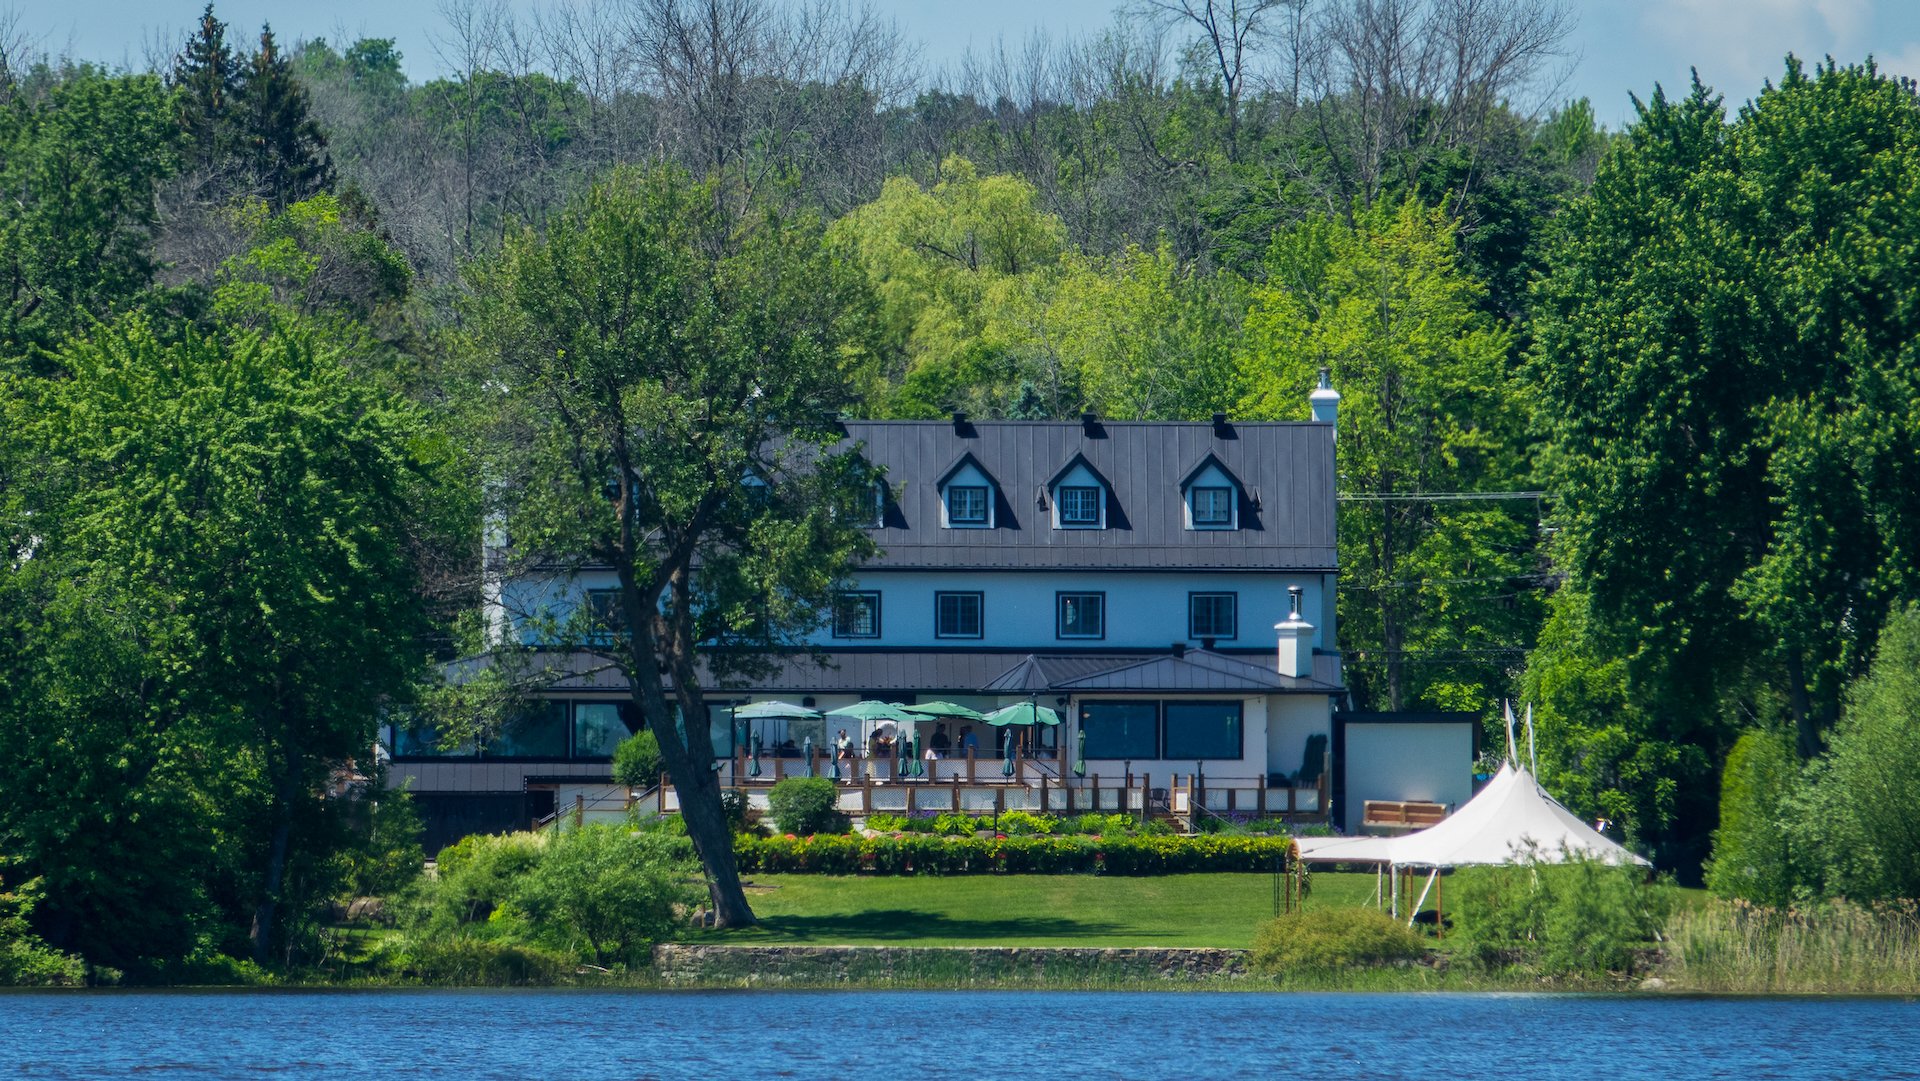  Looking back at the Inn from the Oka ferry.  